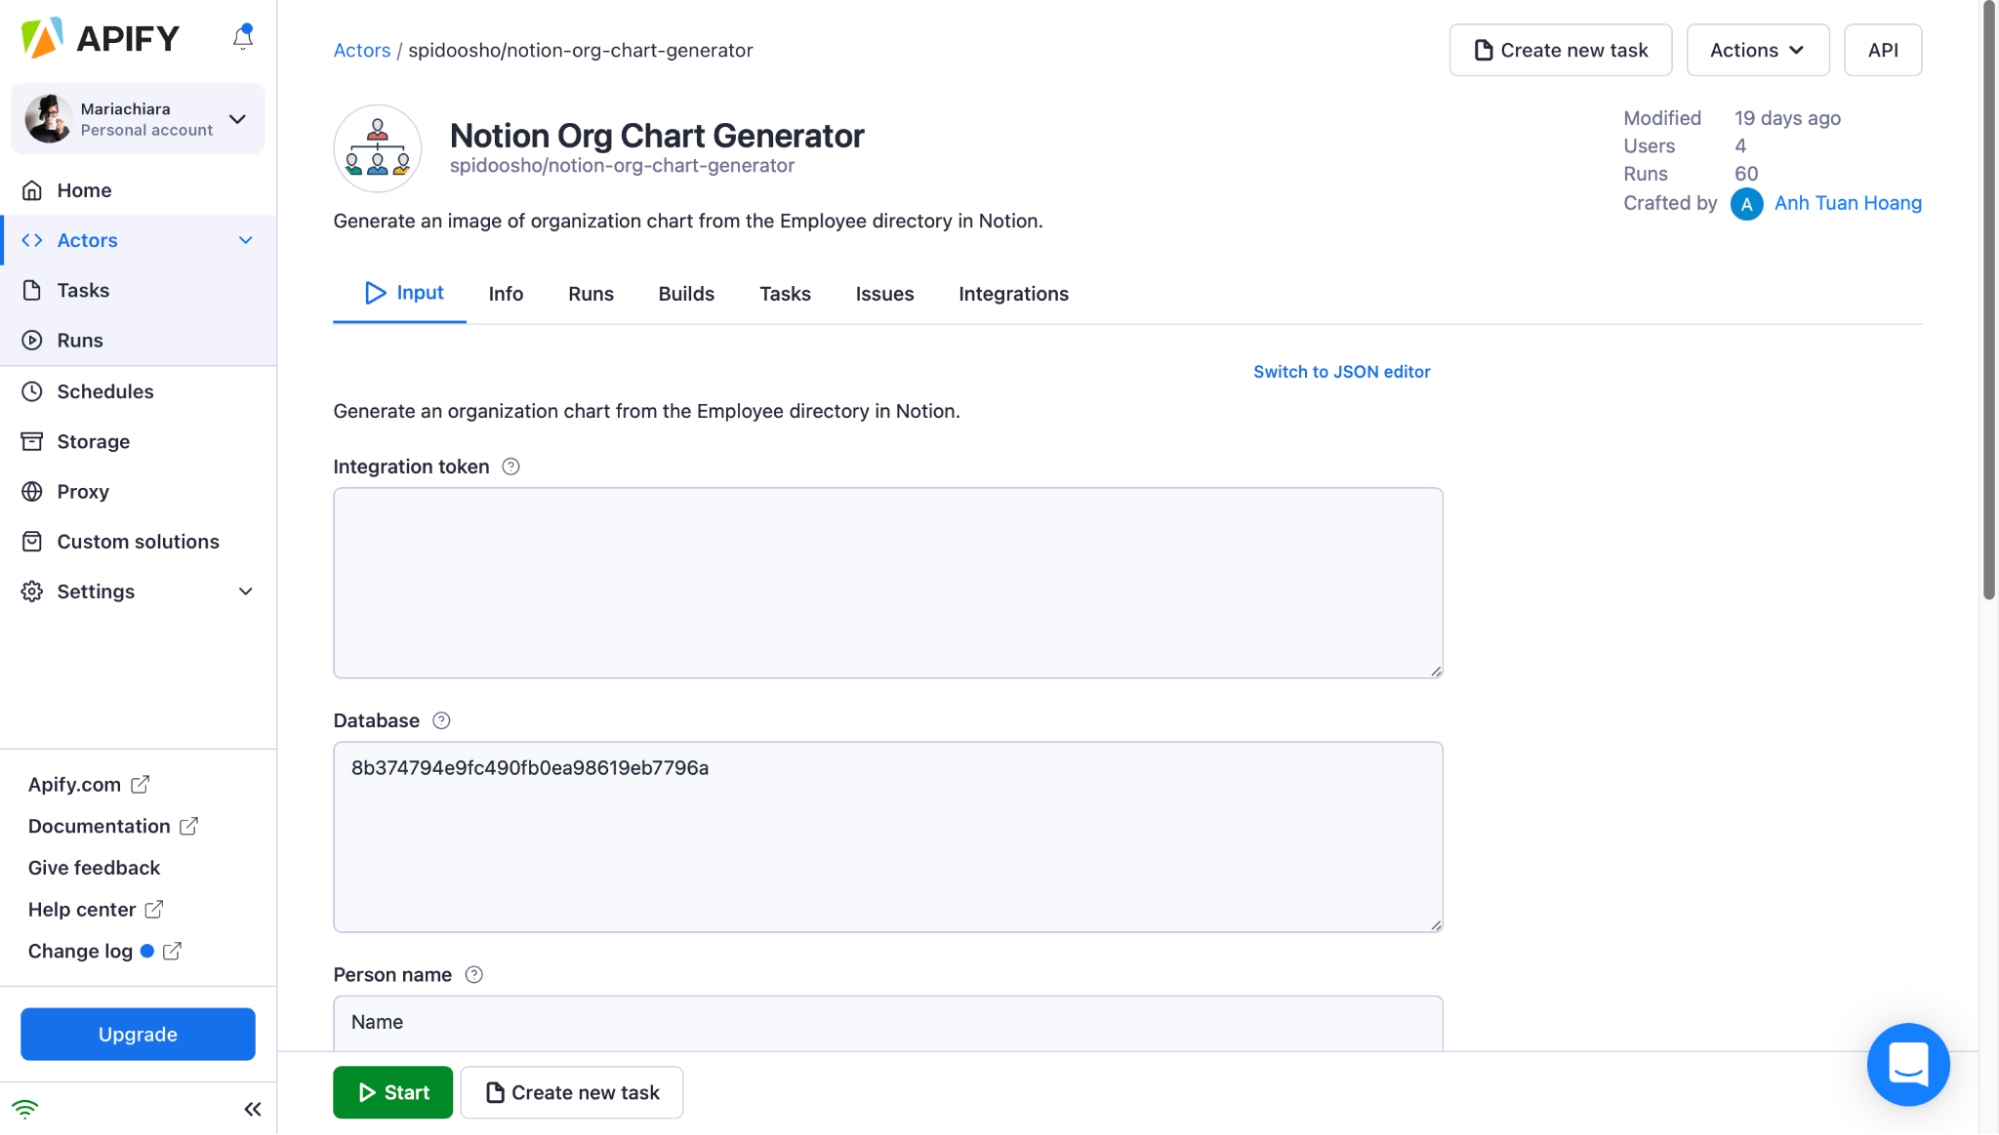 Notion Org Chart Generator's page on Apify Console.